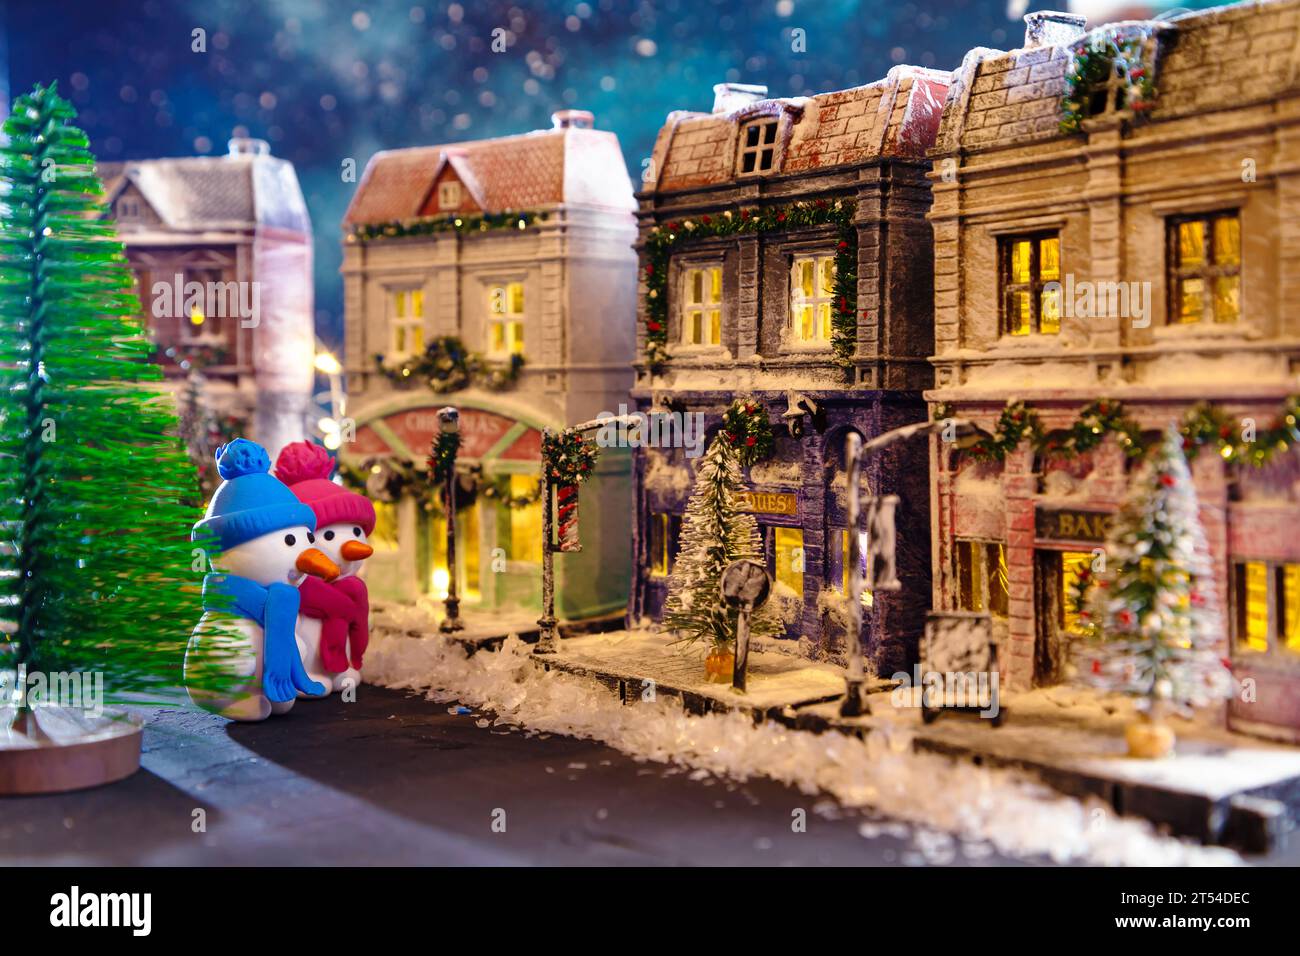 Snowmen on a nightly snow-covered street decorated for Christmas. Homemade decorated toy houses. All elements of the image are made and drawn by hand. Stock Photo